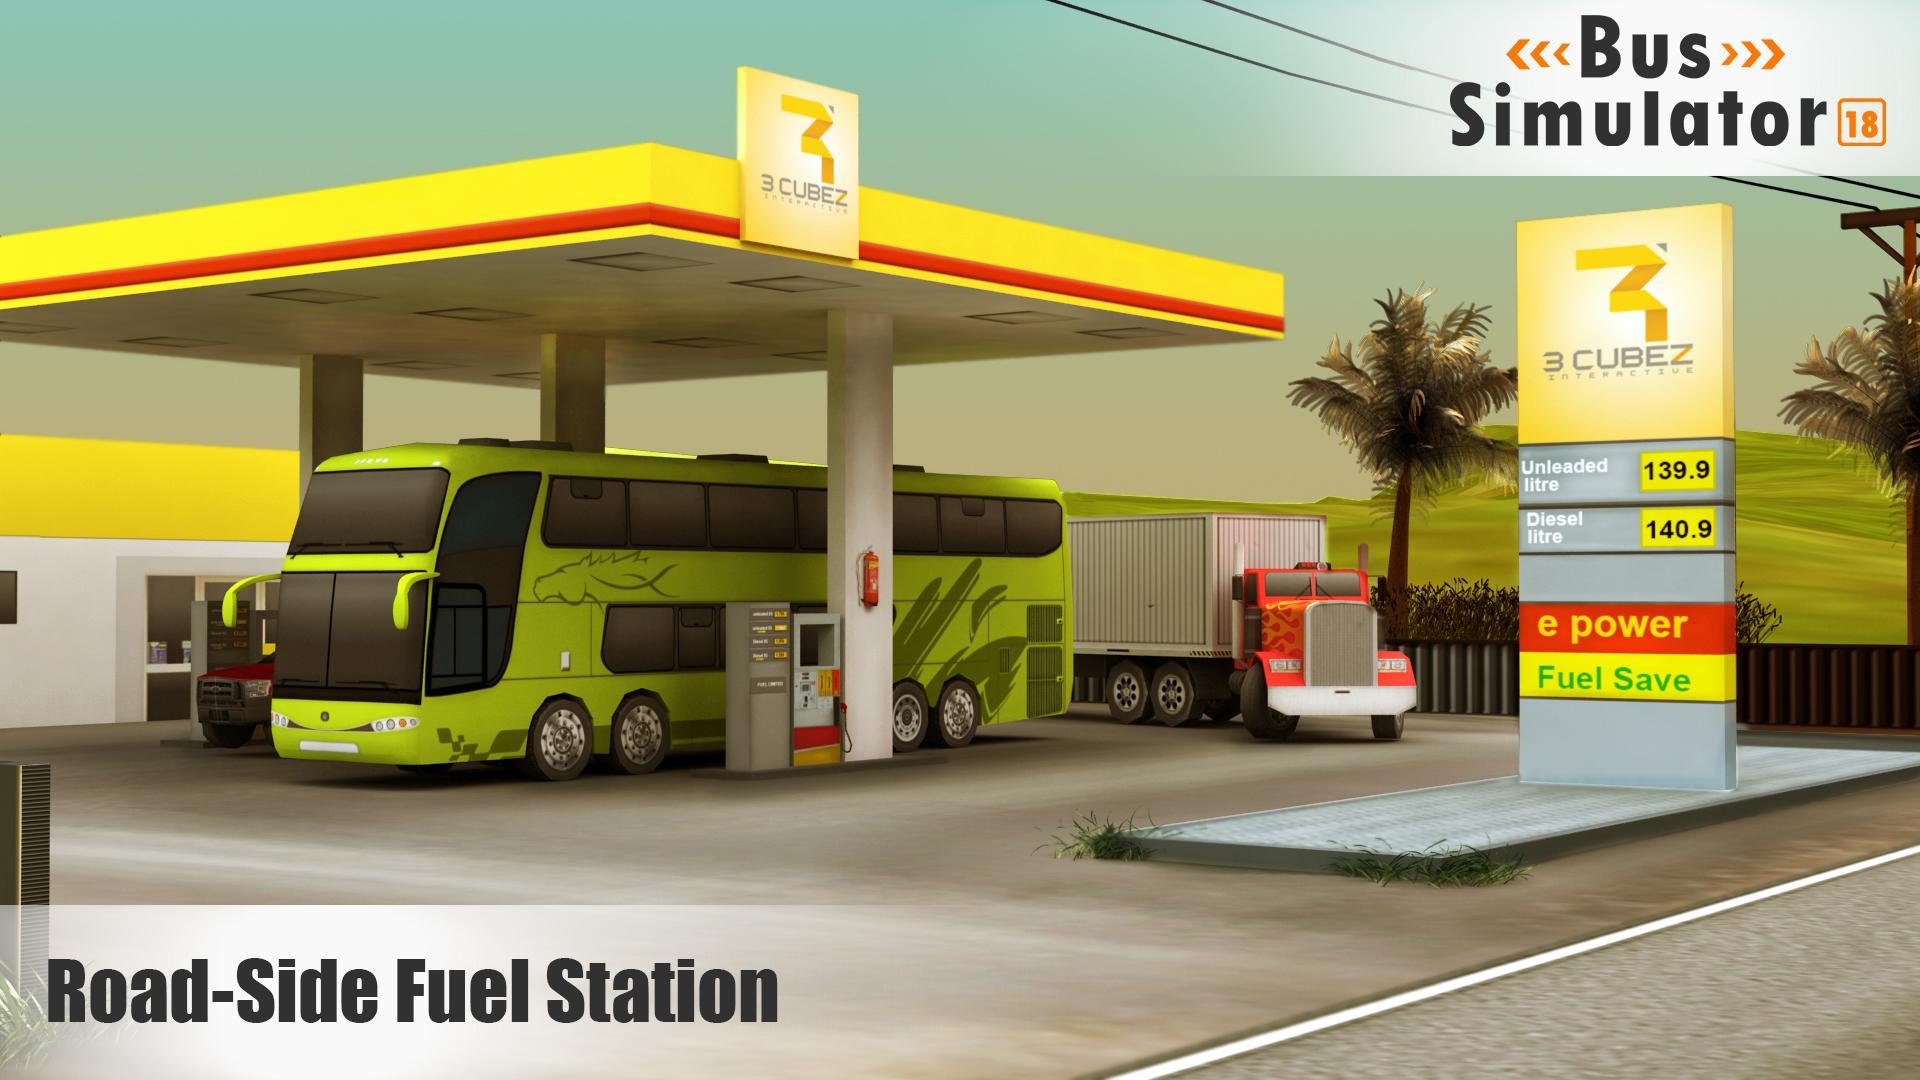 Bus Simulator 18 For Android Apk Download - 